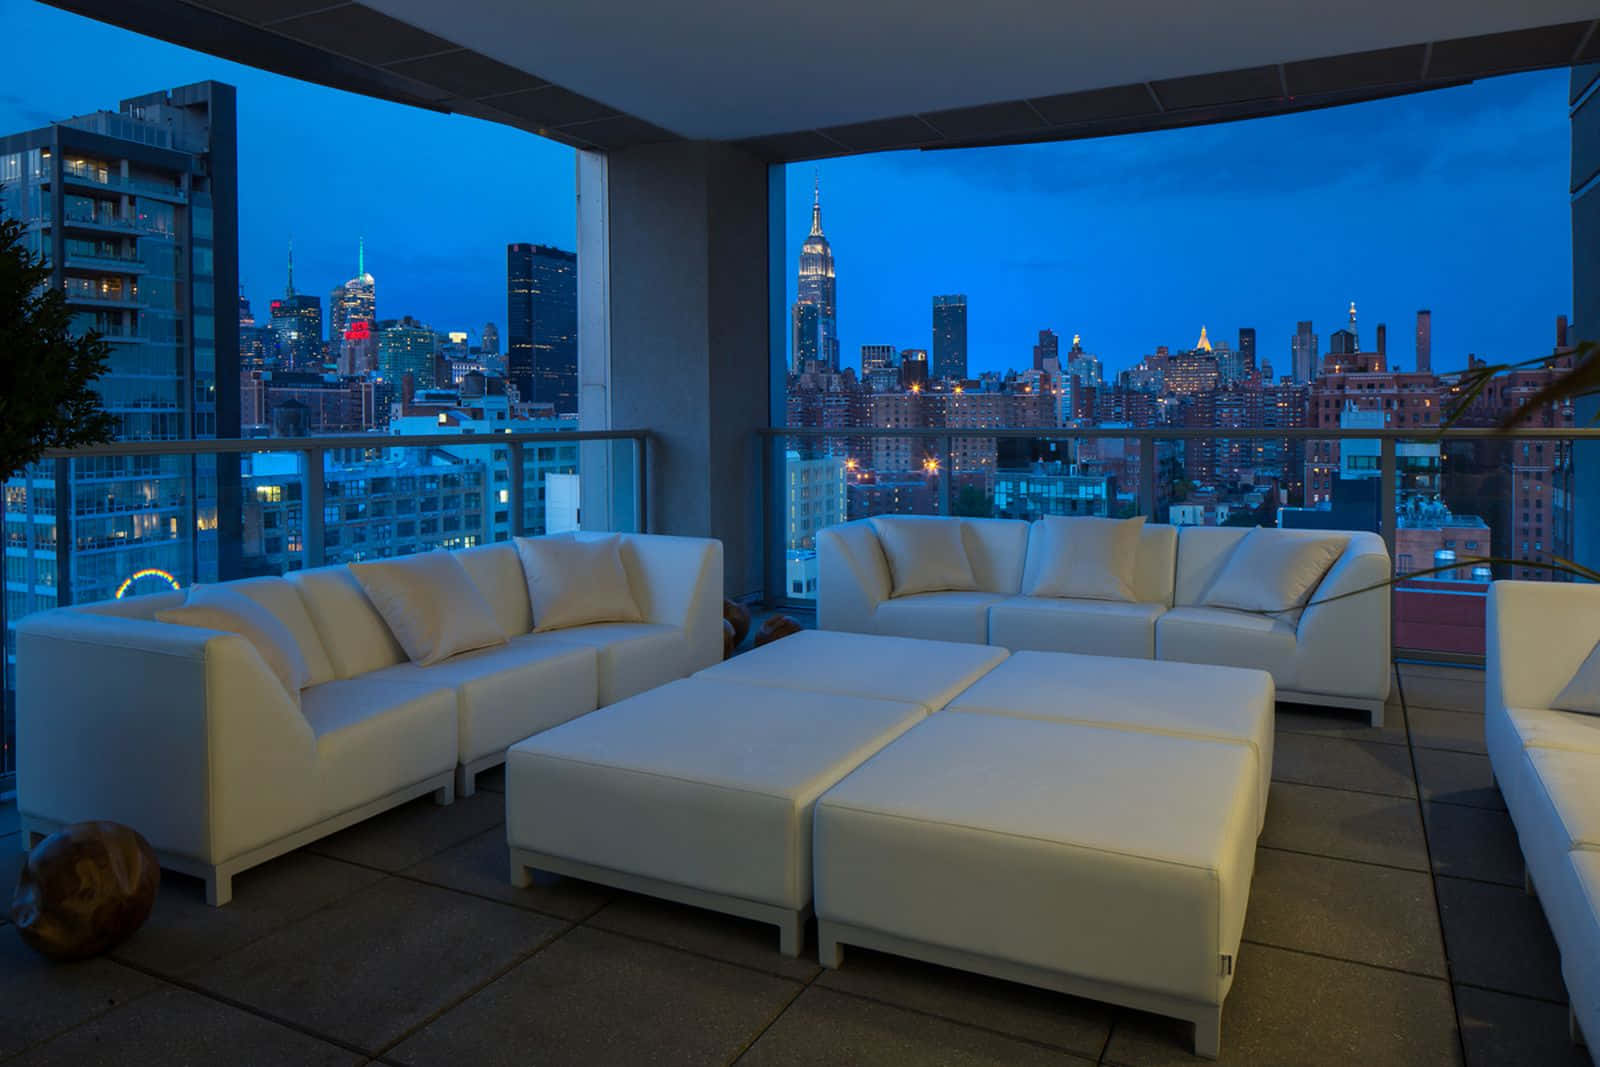 A Balcony With White Furniture And A View Of The City